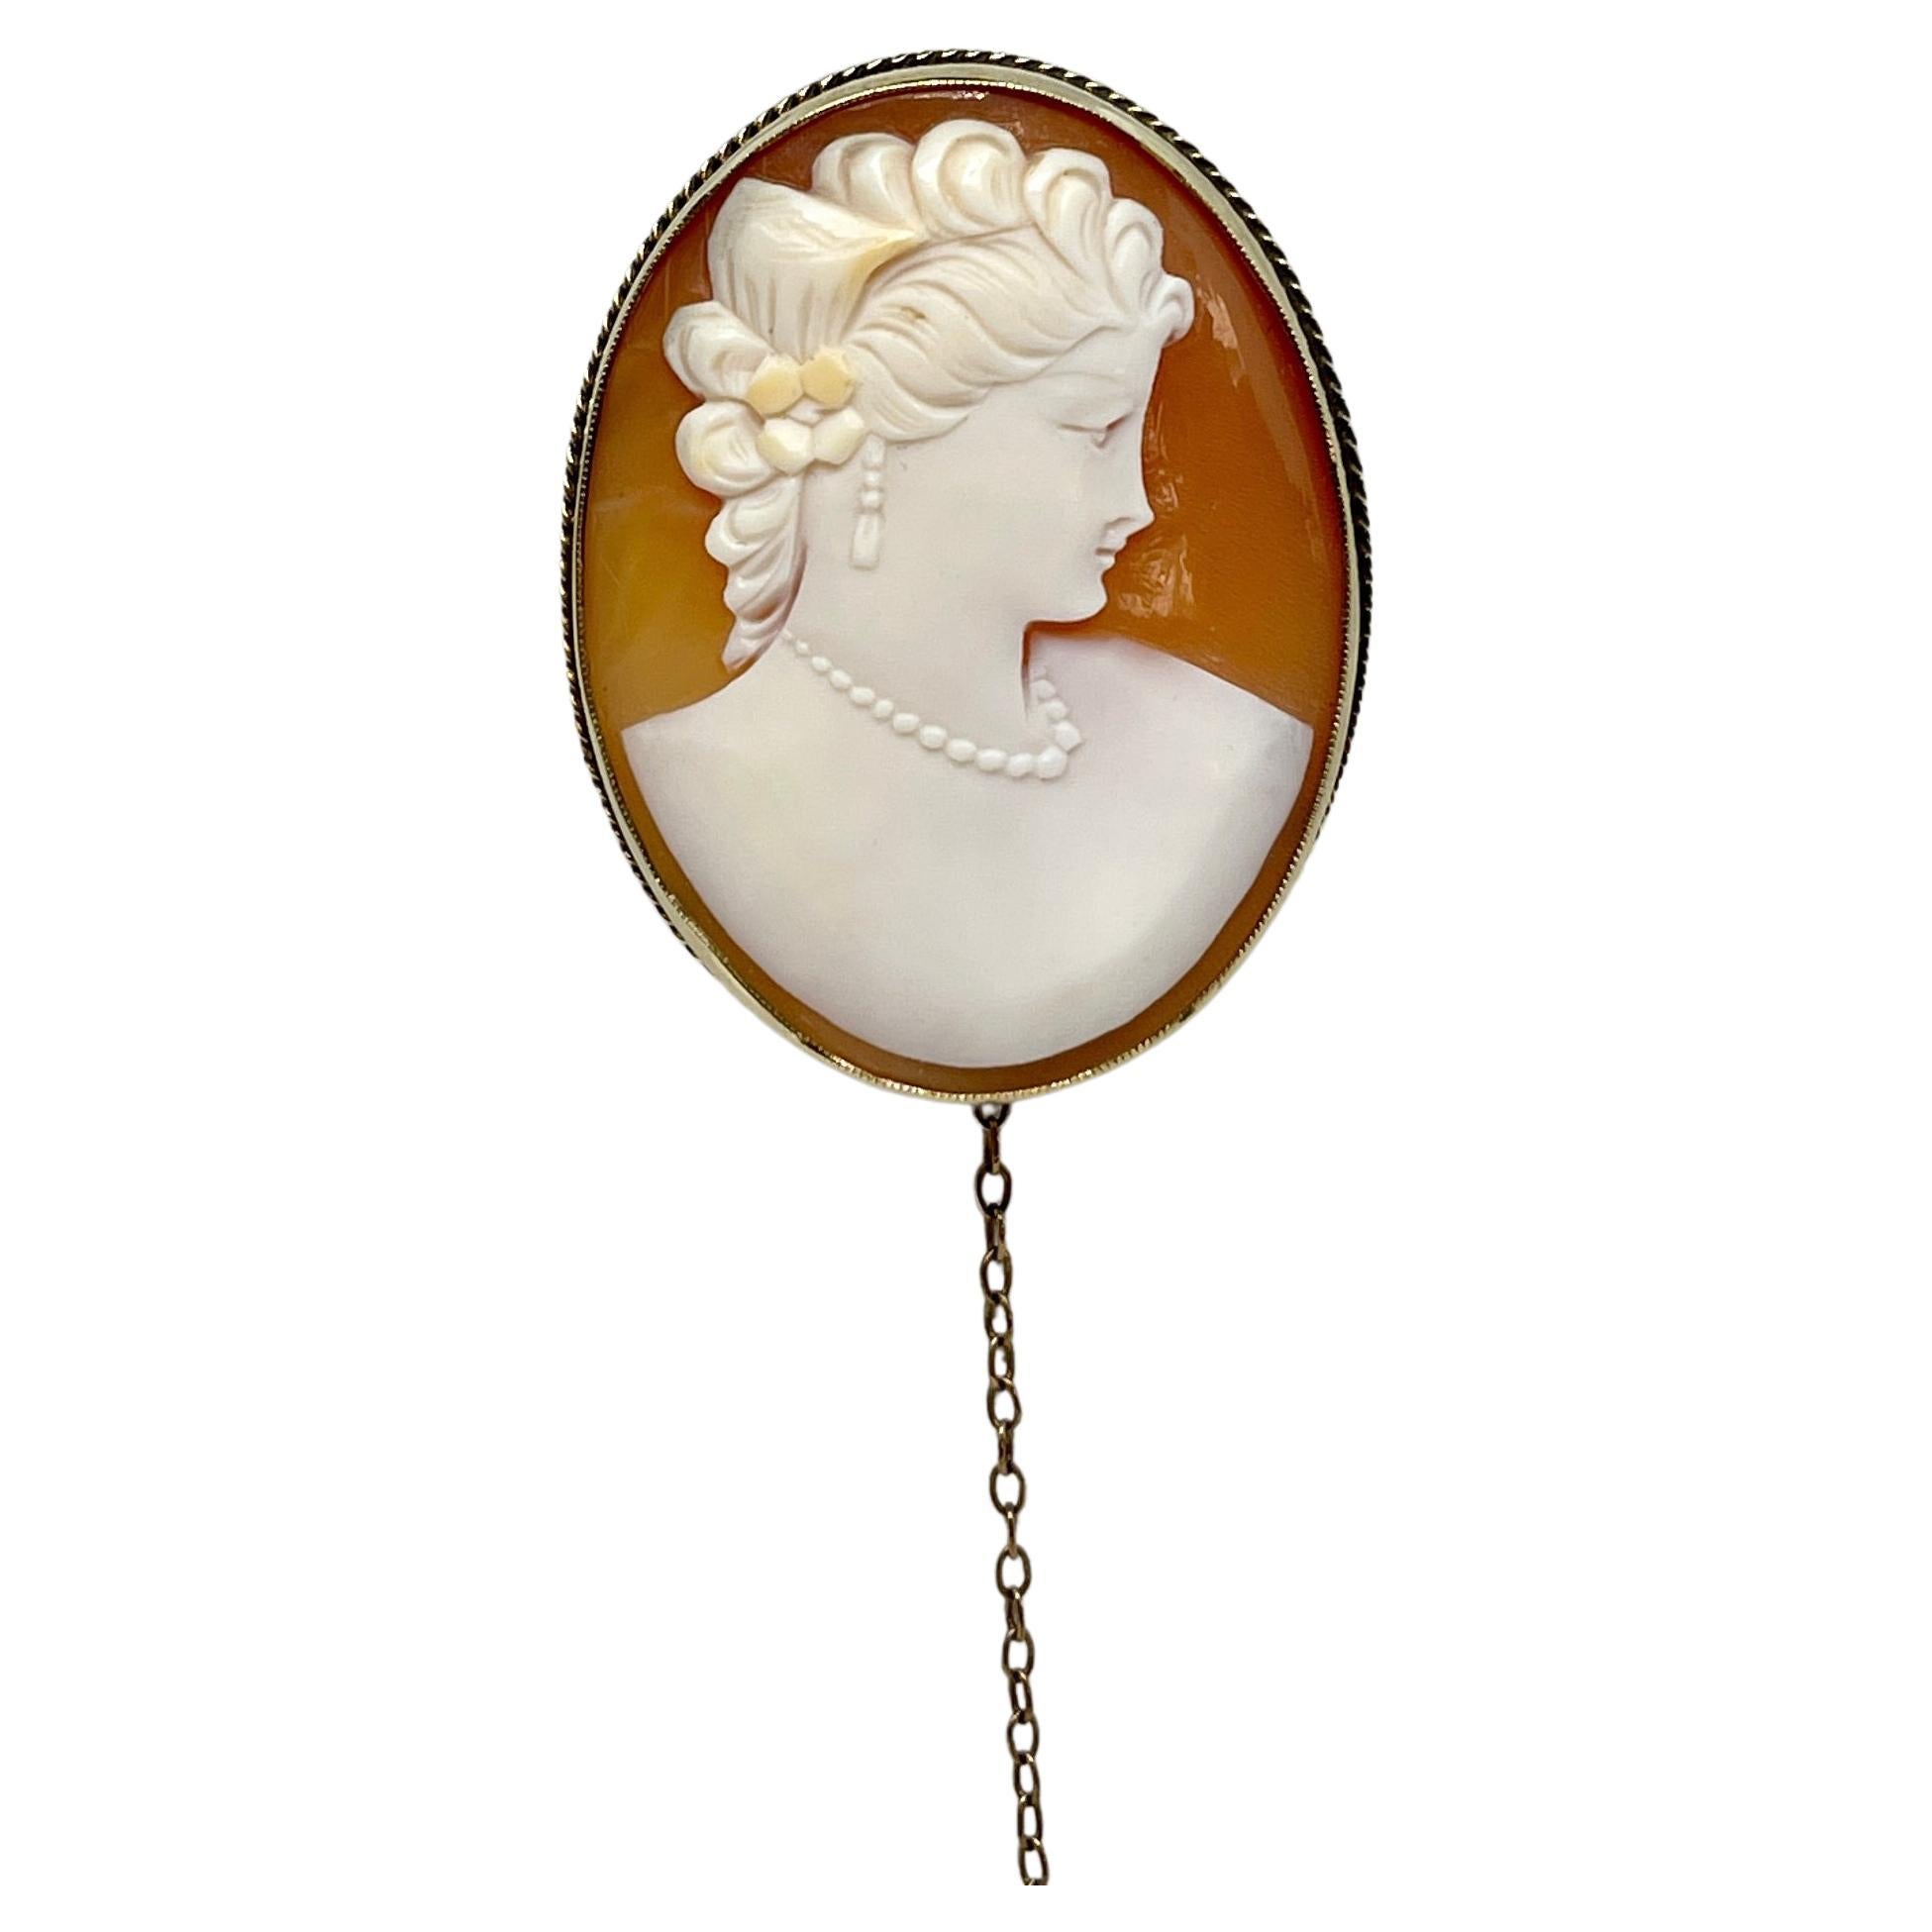 Victorian Antique Cameo Shell Brooch Lady Wearing Pearls Circa 1890 18ct Gold